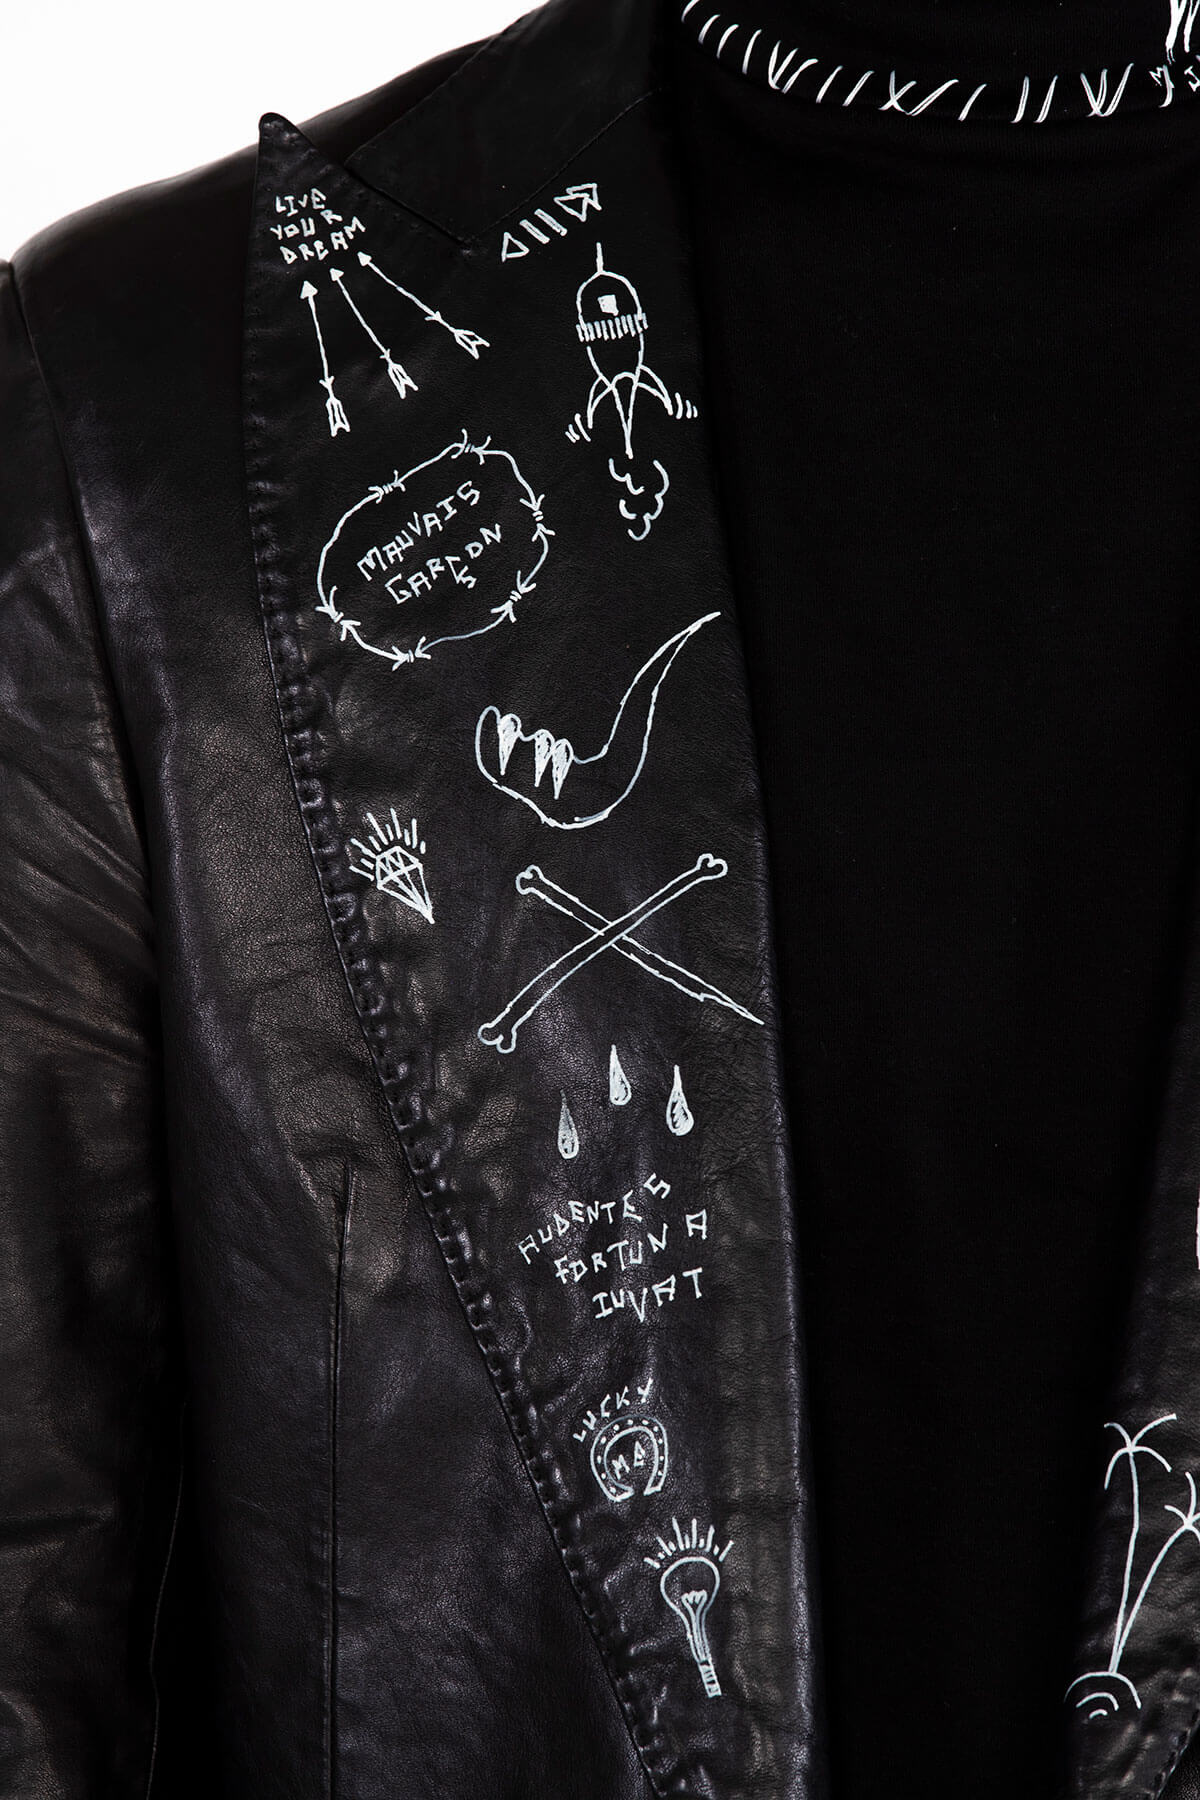 CLASSIC LEATHER JACKET – HAND PAINTED - ARCHIVE JACKET - MJB